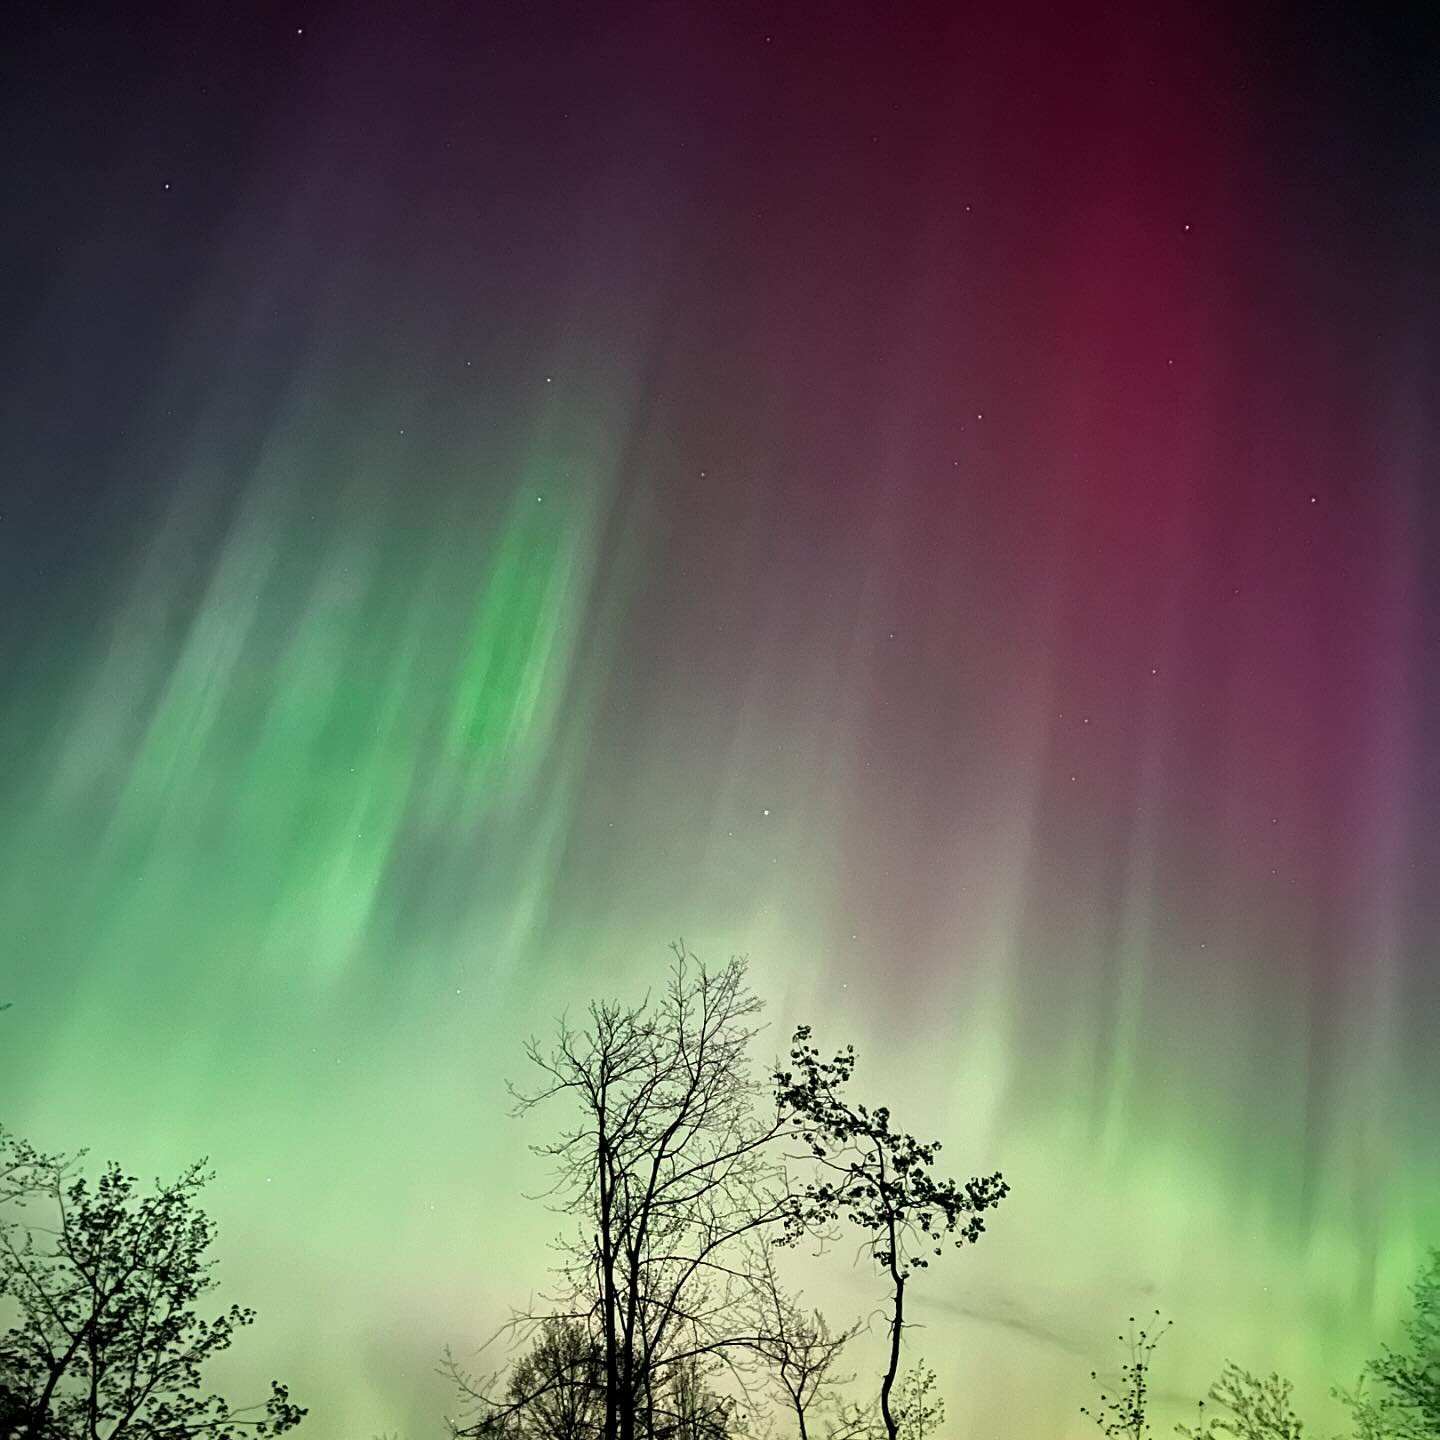 It is crazy to me that I&rsquo;ve traveled to Iceland to chase the northern lights saw nothing, and got the best show in Emily, MN on a night that we didn&rsquo;t even know if we&rsquo;d see them again. 

I sat outside with my family, watching their 